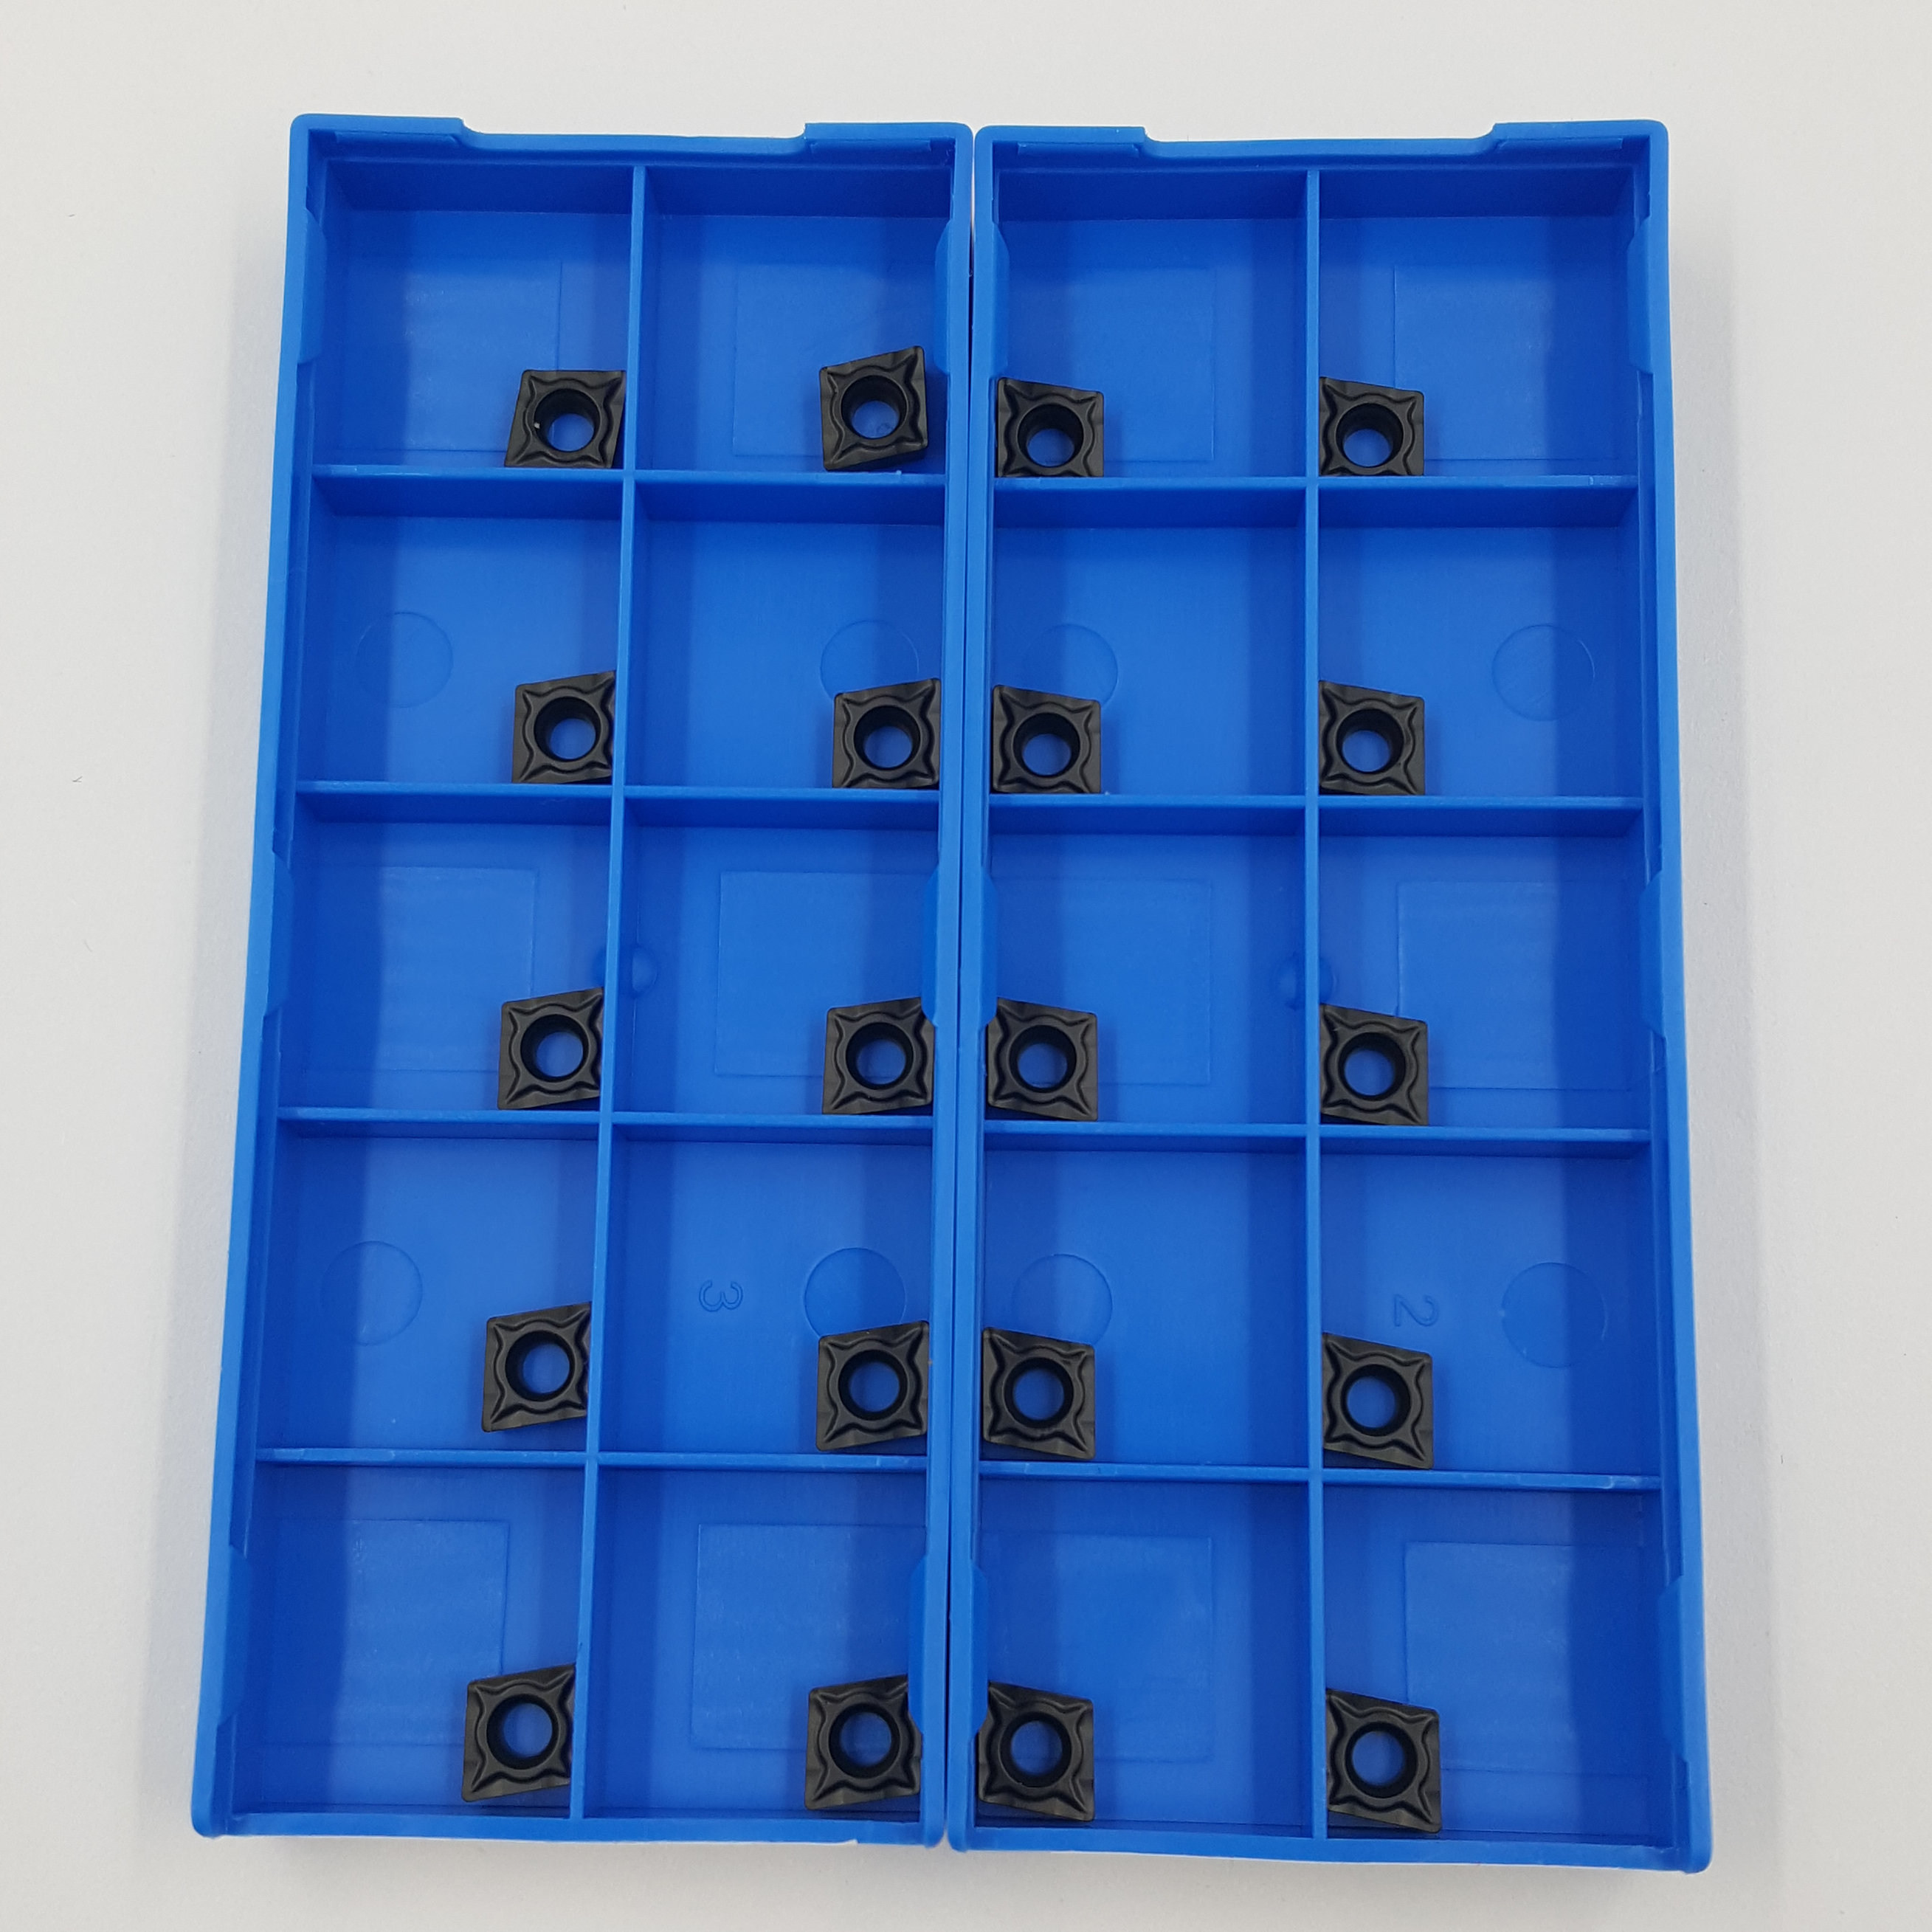 WITAIK High Quality Carbide Inserts Turning Tool CCMT060204-HM WP6252 CCMT060208-HM WP6252 Sutiable for Processing Steel Parts